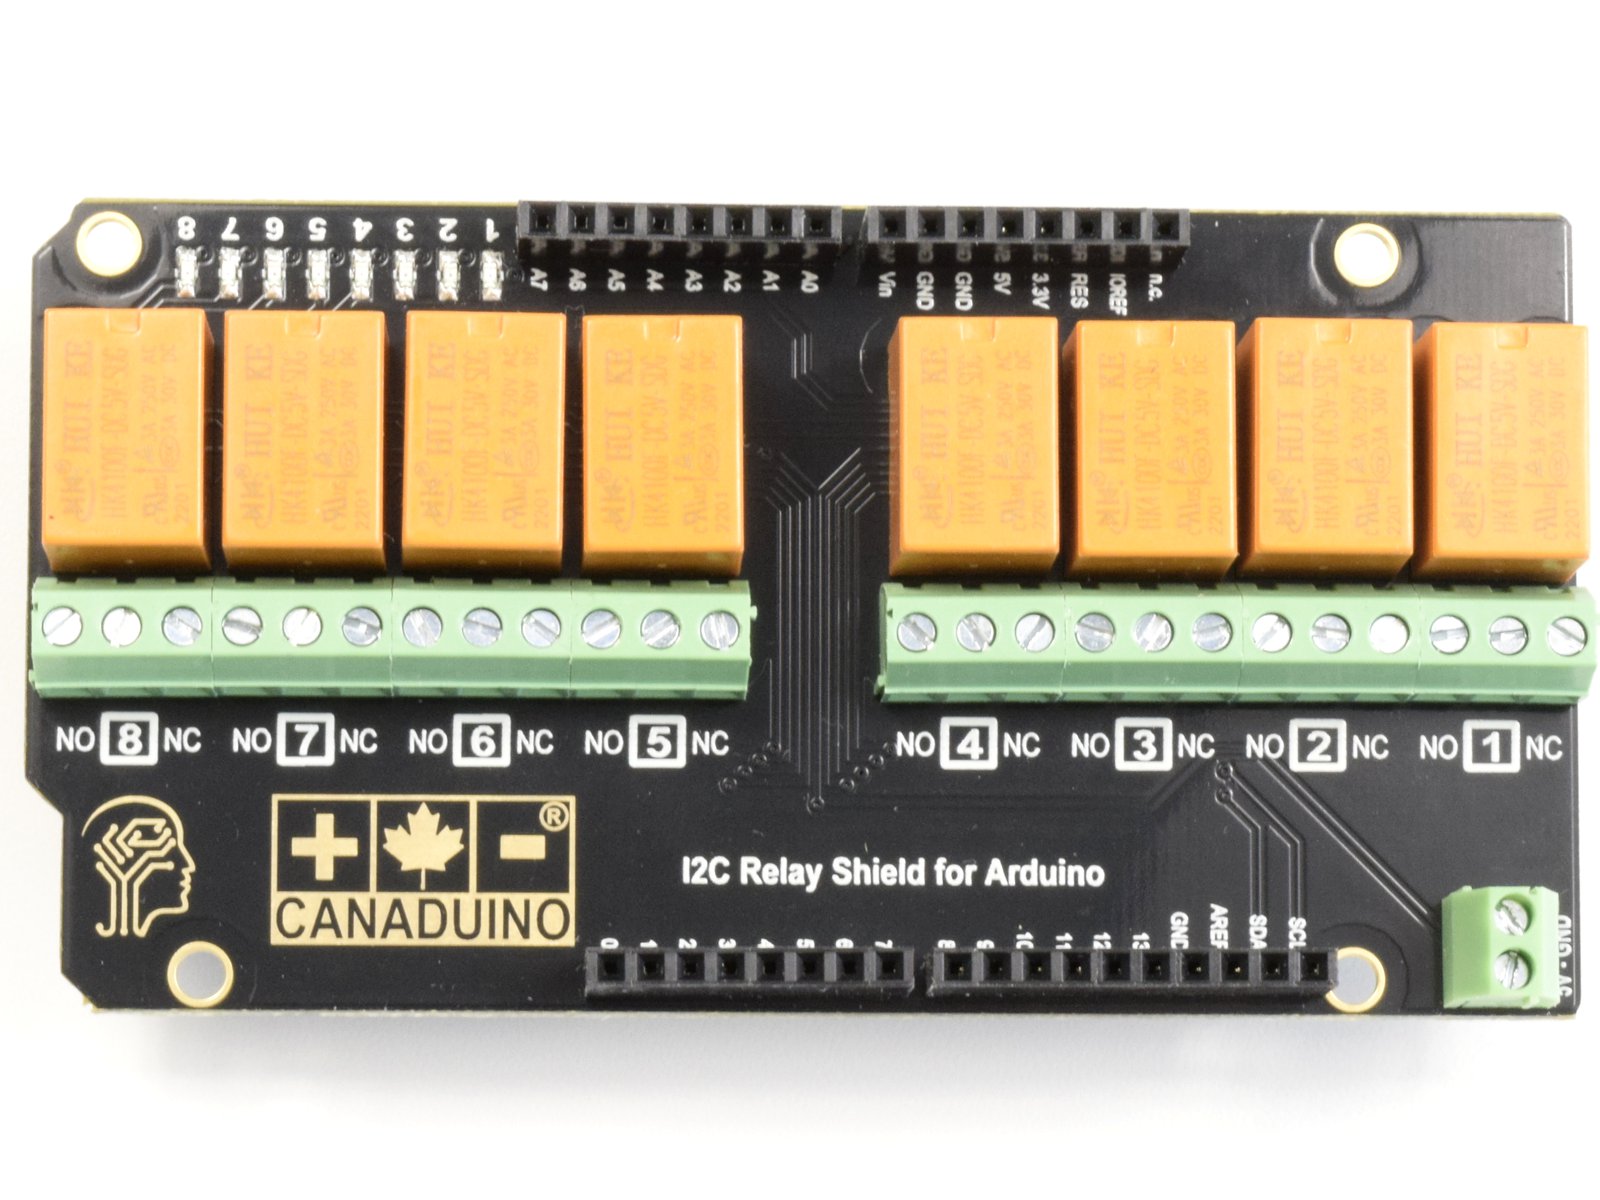 CANADUINO 8-Channel Stackable I2C Relay Shield for Arduino – Assembled 5